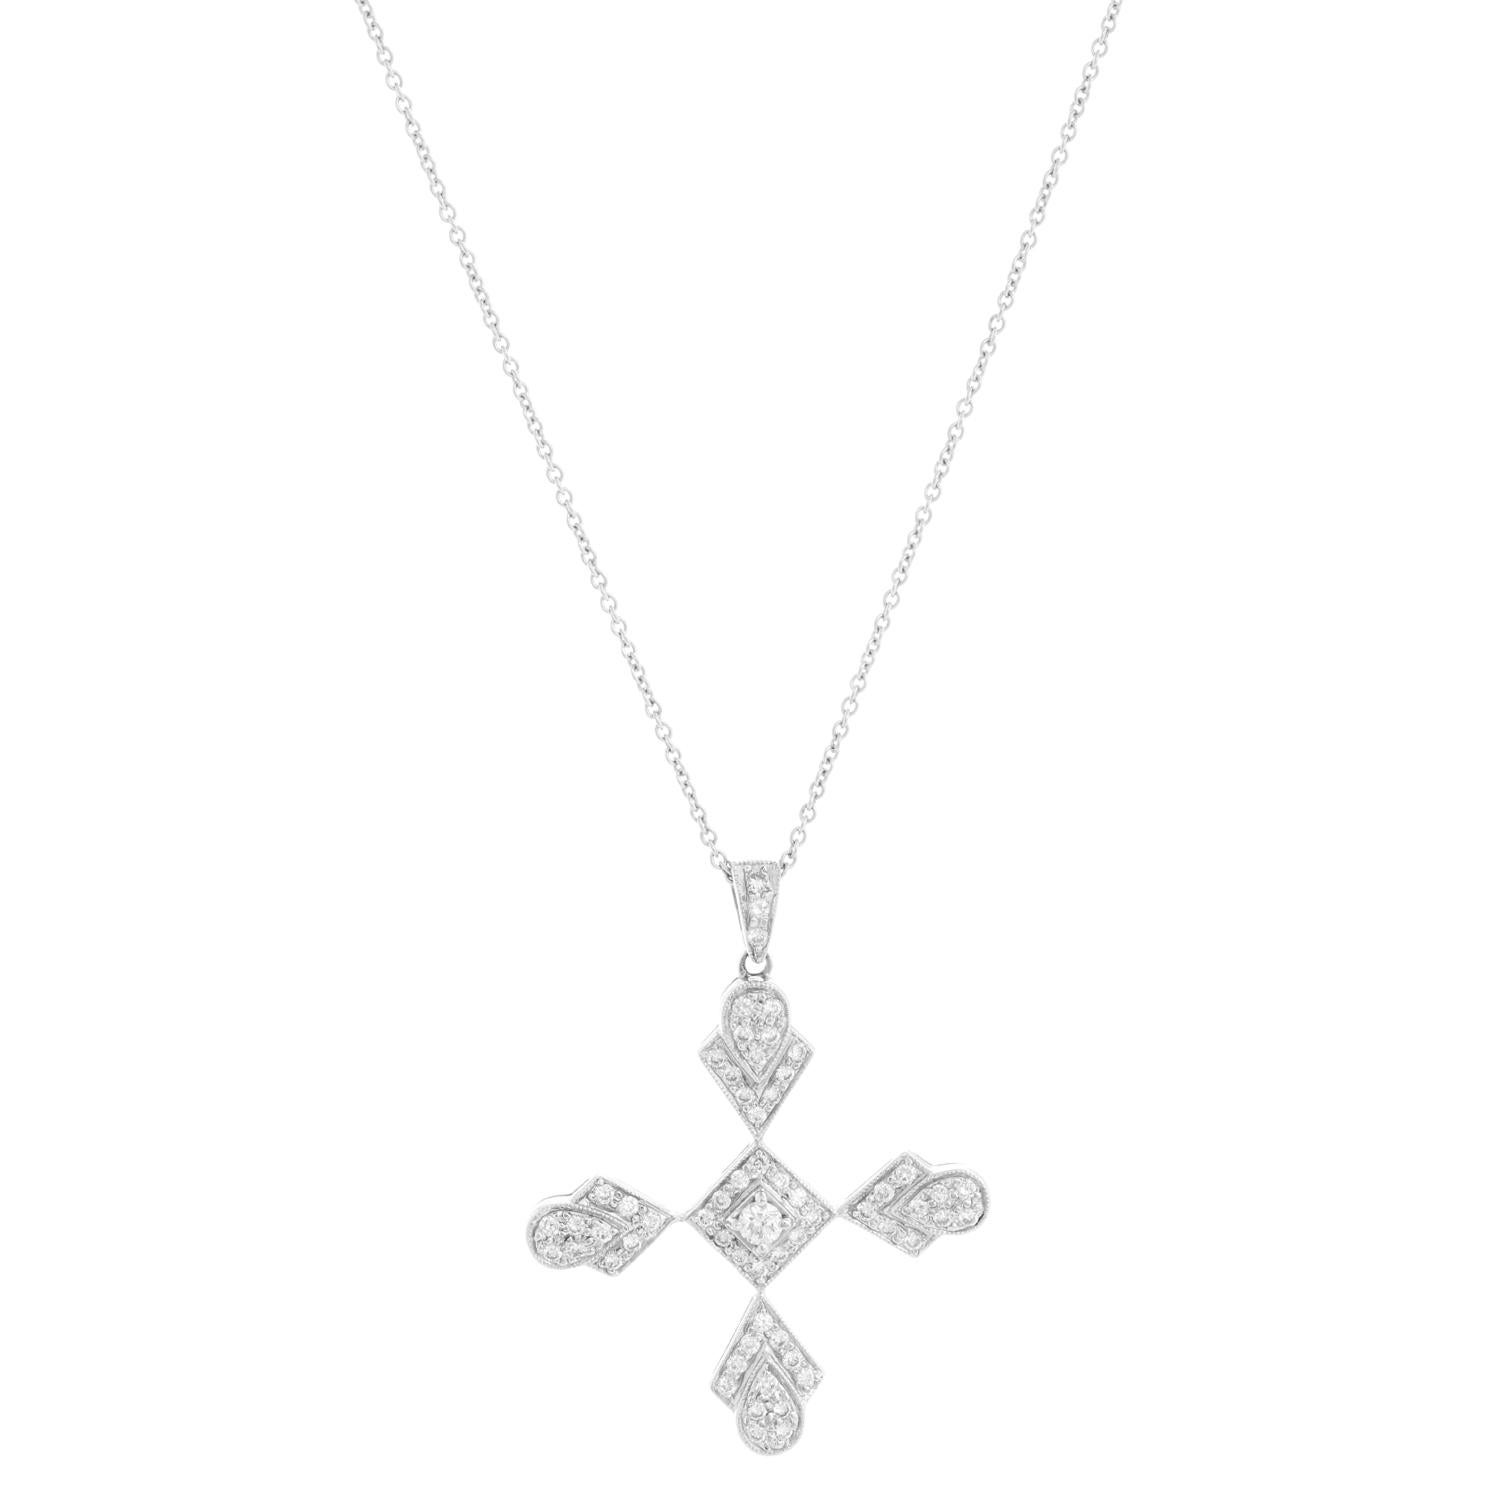 Stunning Sue Gragg 18k White Gold Diamond Cross with Necklace In Excellent Condition For Sale In Dallas, TX